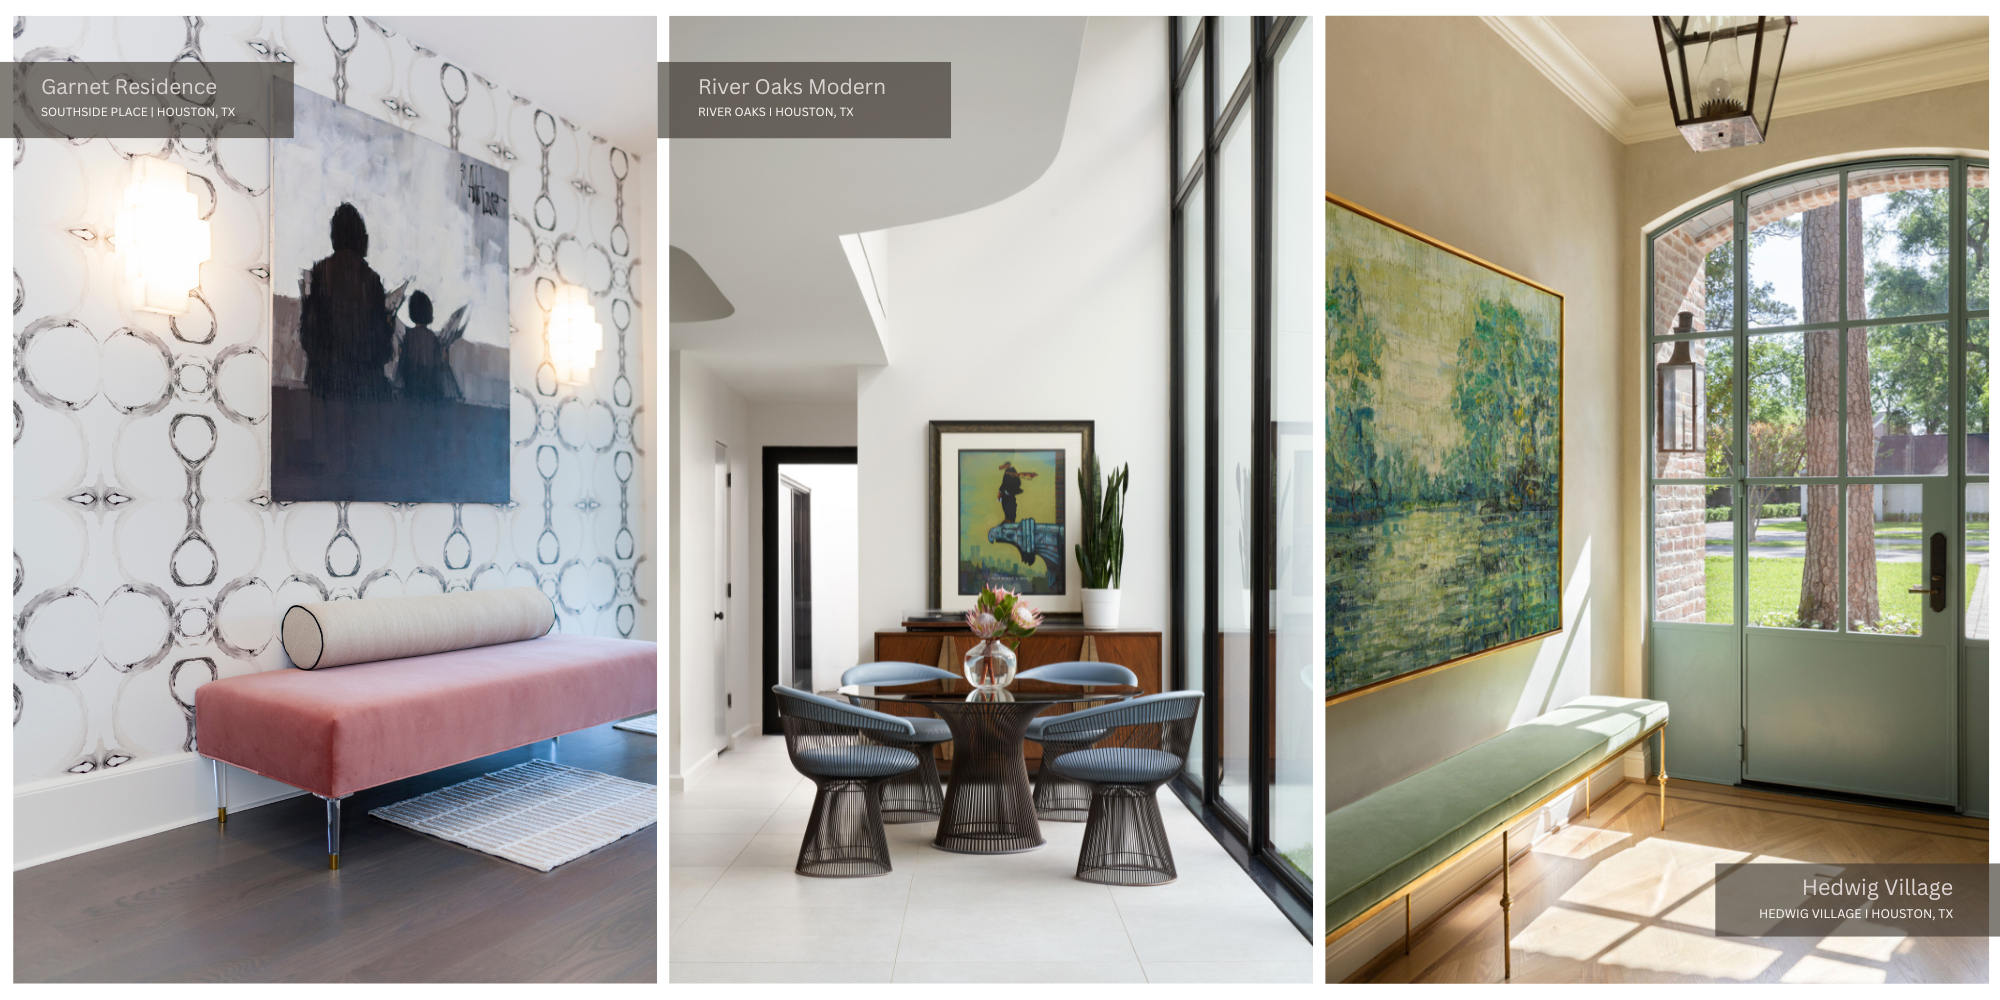 Artwork in the hallway of our Garnet Residence, the breakfast room of our River Oaks Modern project, and the foyer of our Hedwig Village project.